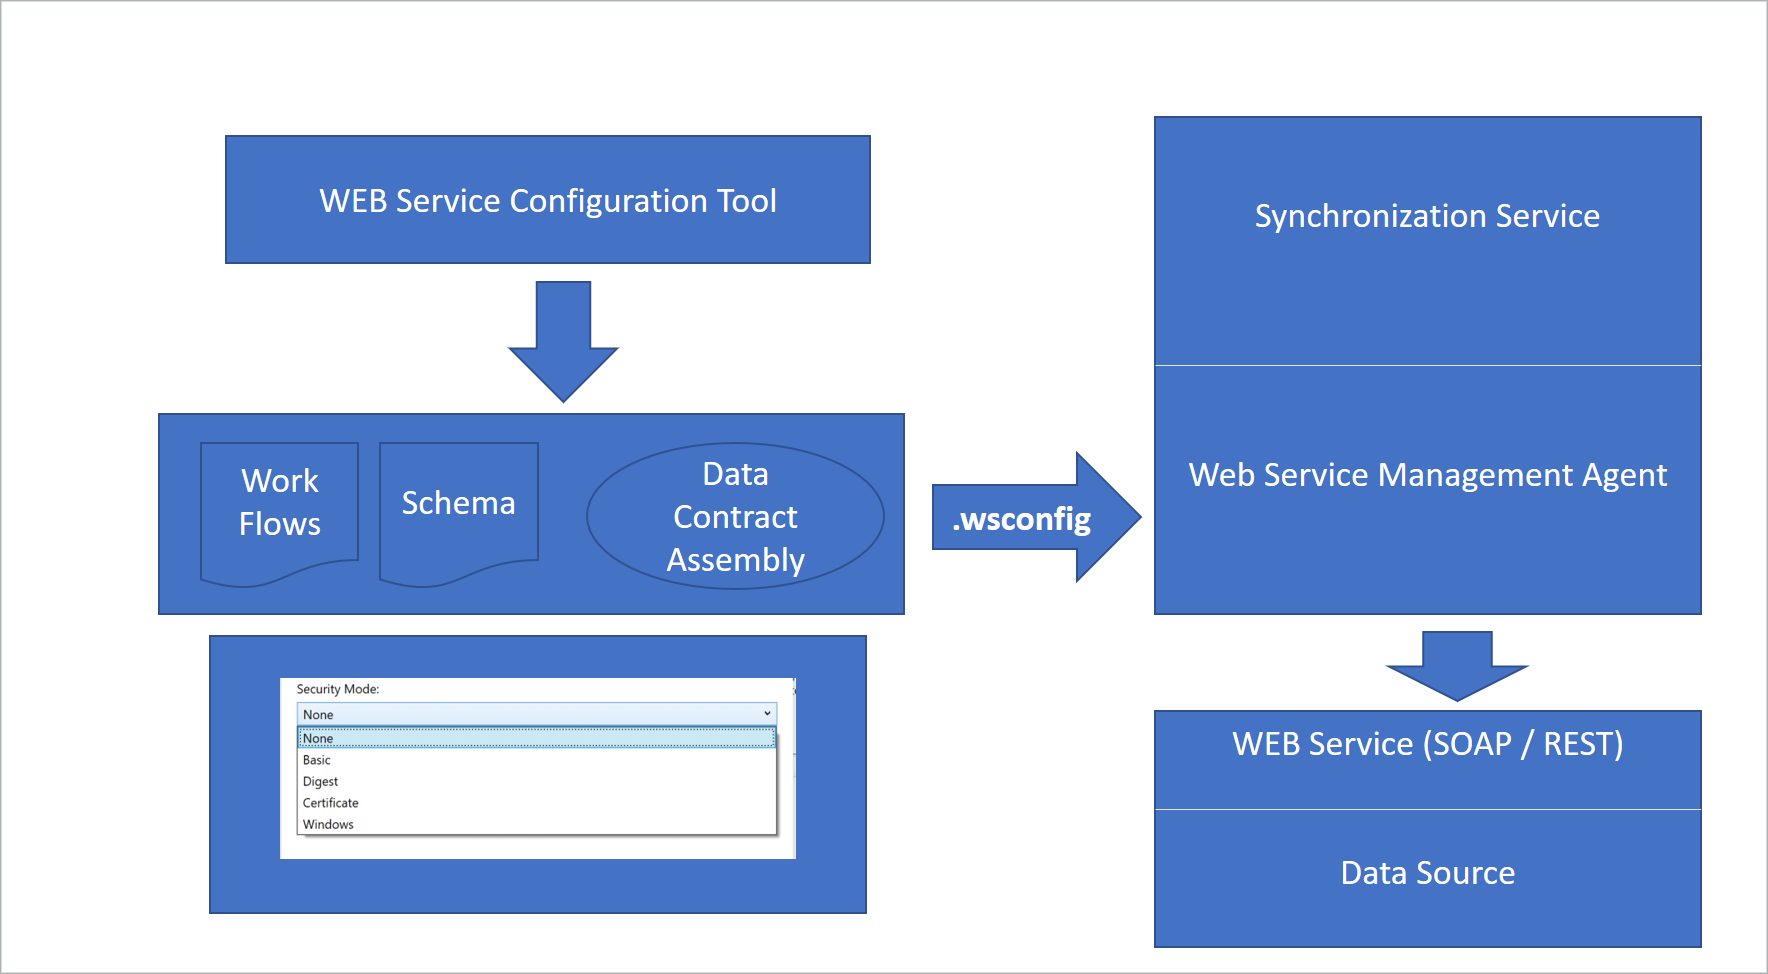 Workflow creation of a .wsconfig file by the web services configuration tool for use by the web services management agent